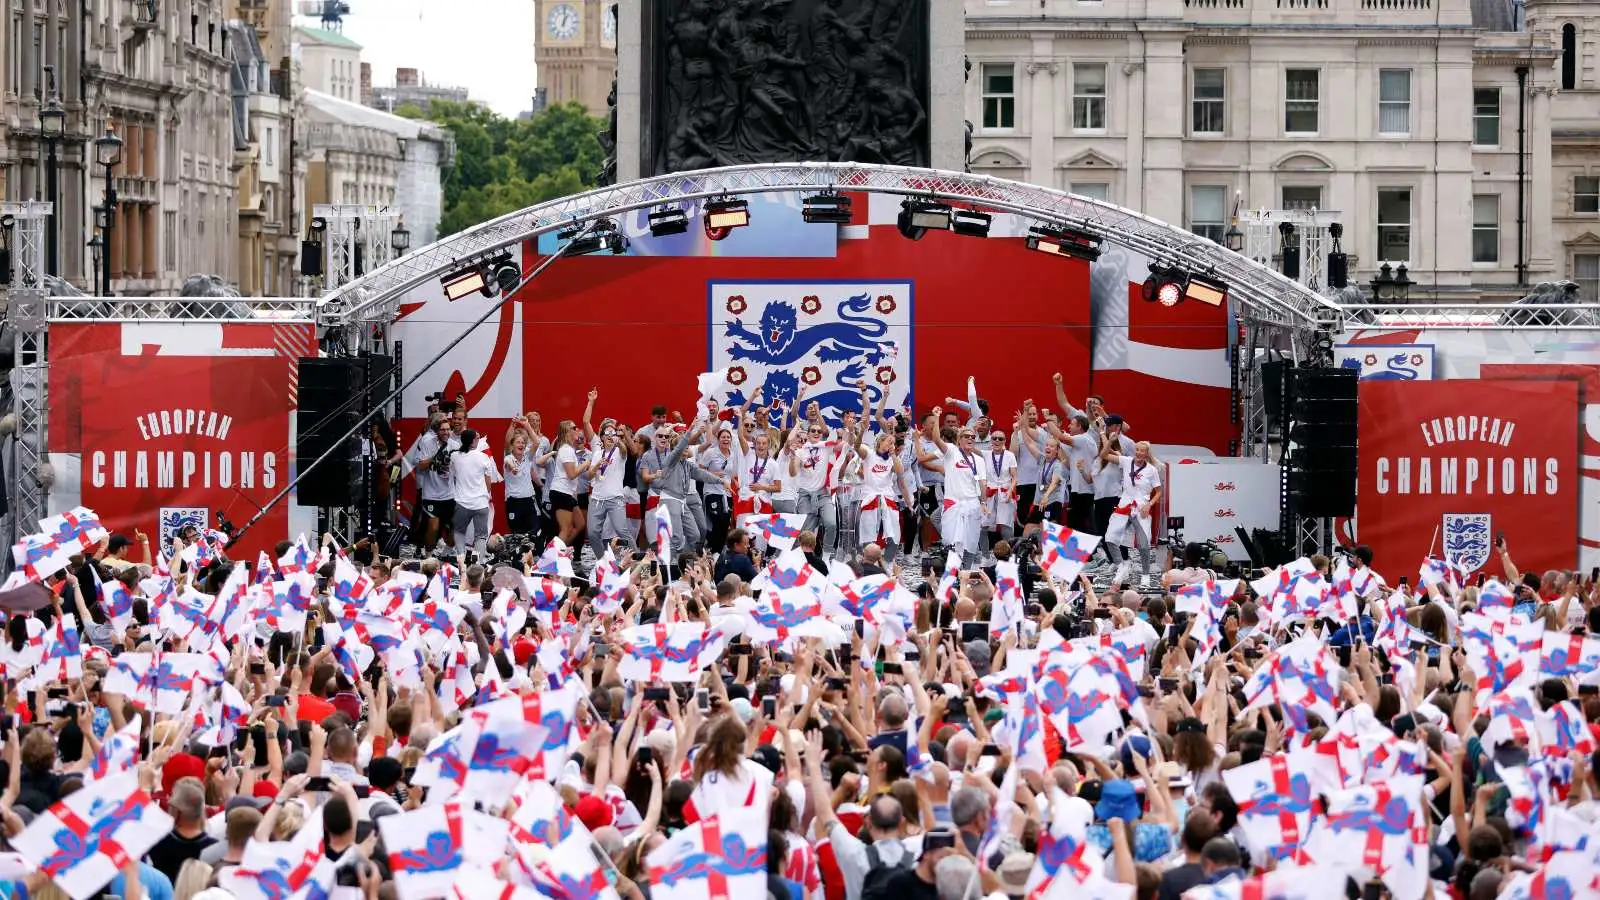 England players on stage at Trafalgar Square